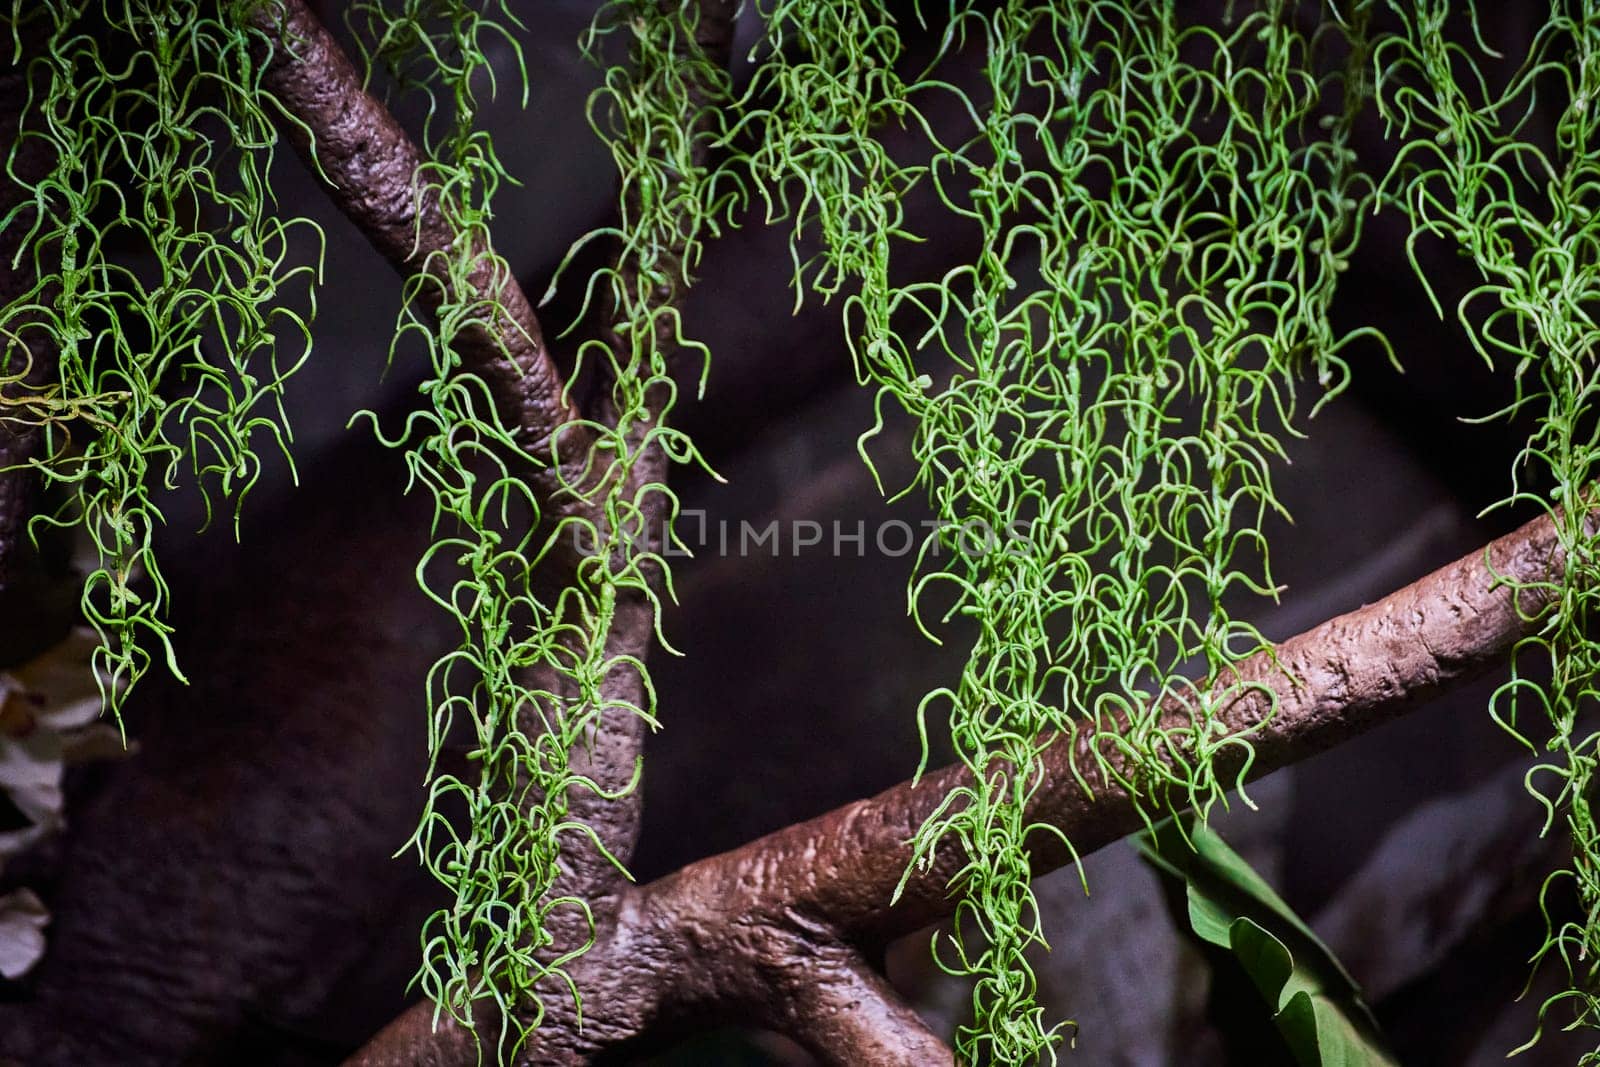 Lush green tendrils cascade from gnarled branches, showcasing growth and vitality in a botanical setting.